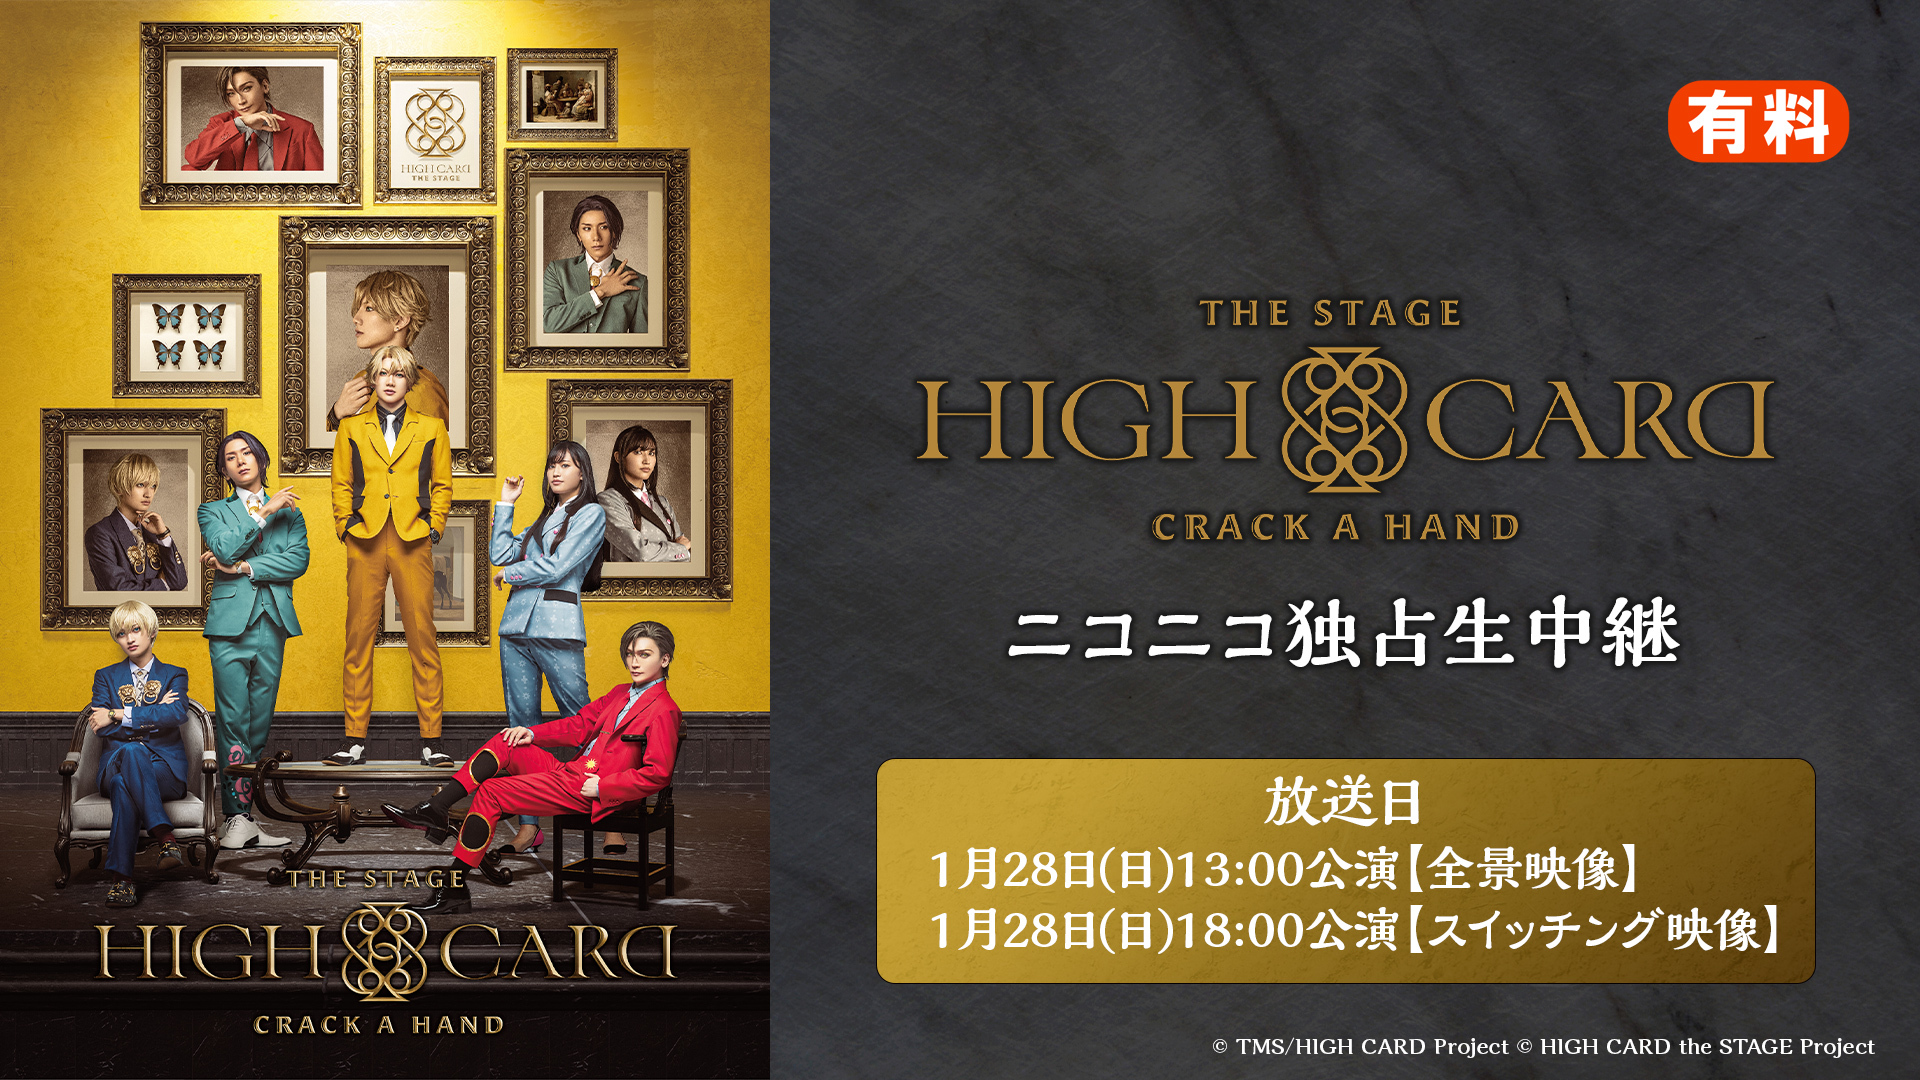 HIGH CARD the STAGE – CRACK A HAND